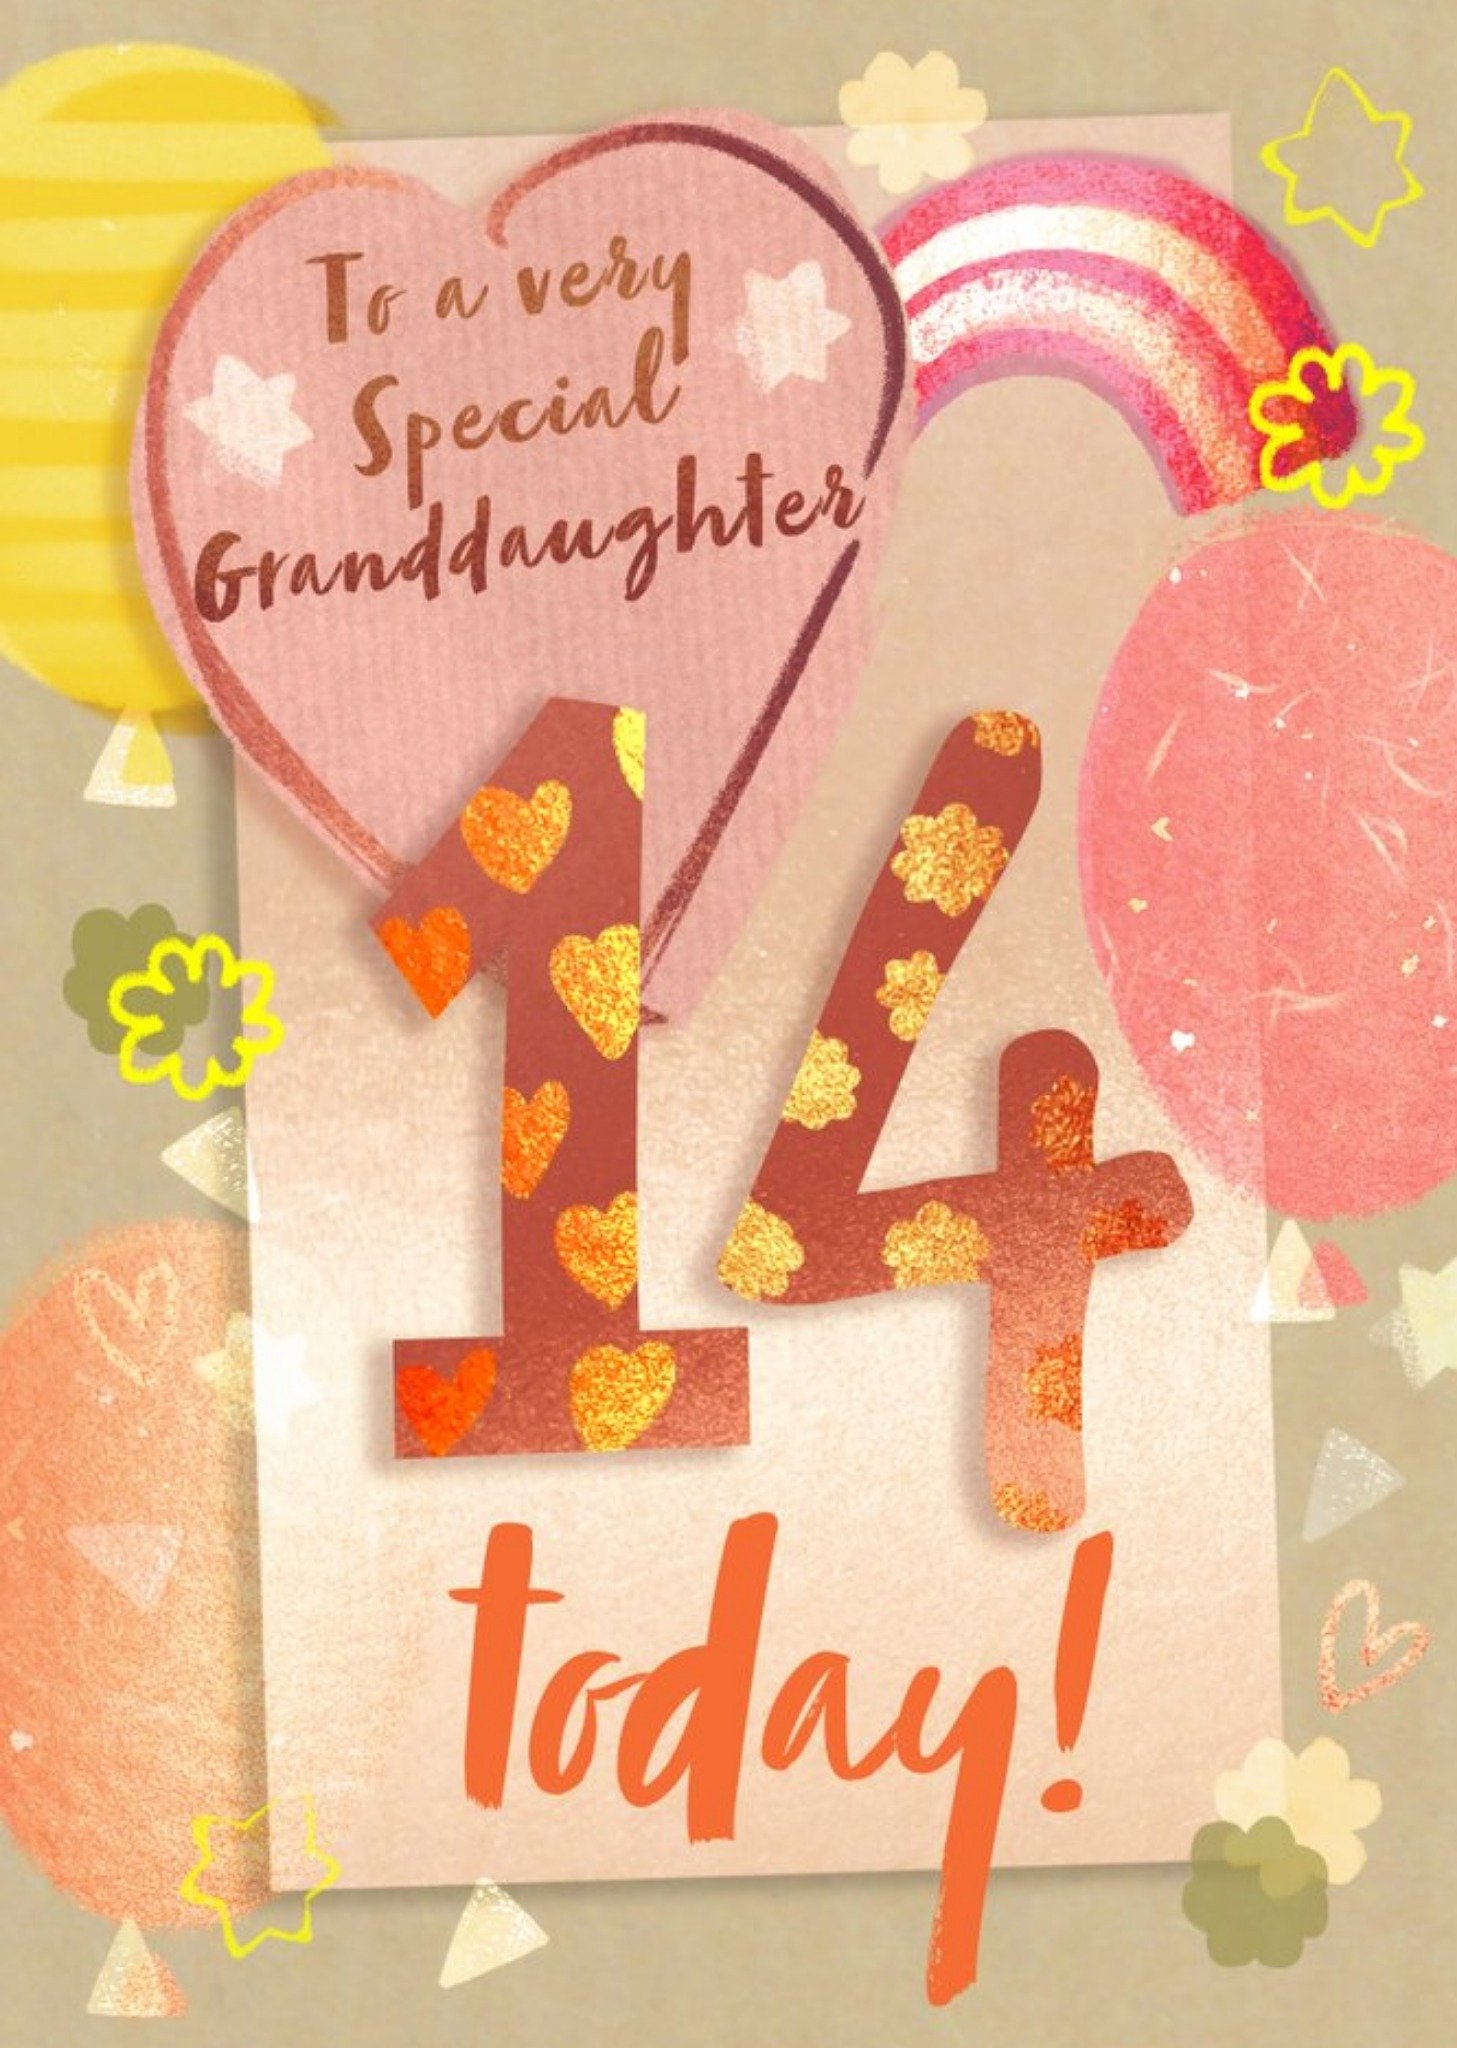 Moonpig To A Very Special Granddaughter 14 Today Age Birthday Card Ecard